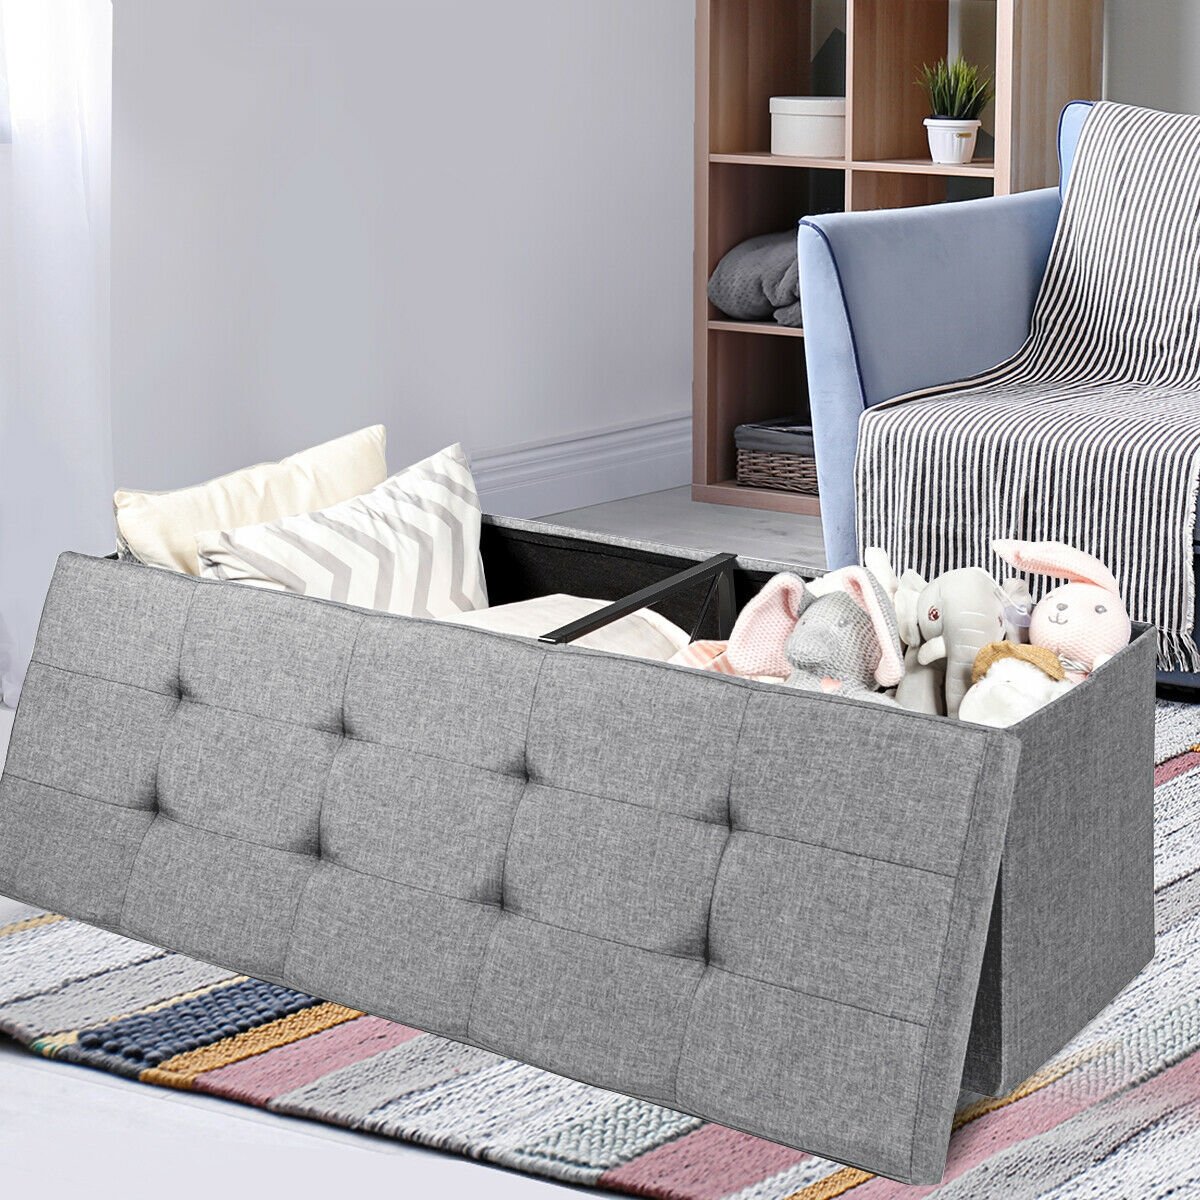 Large Fabric Folding Storage Chest with Smart lift Divider Bed End Ottoman Bench, Light Gray